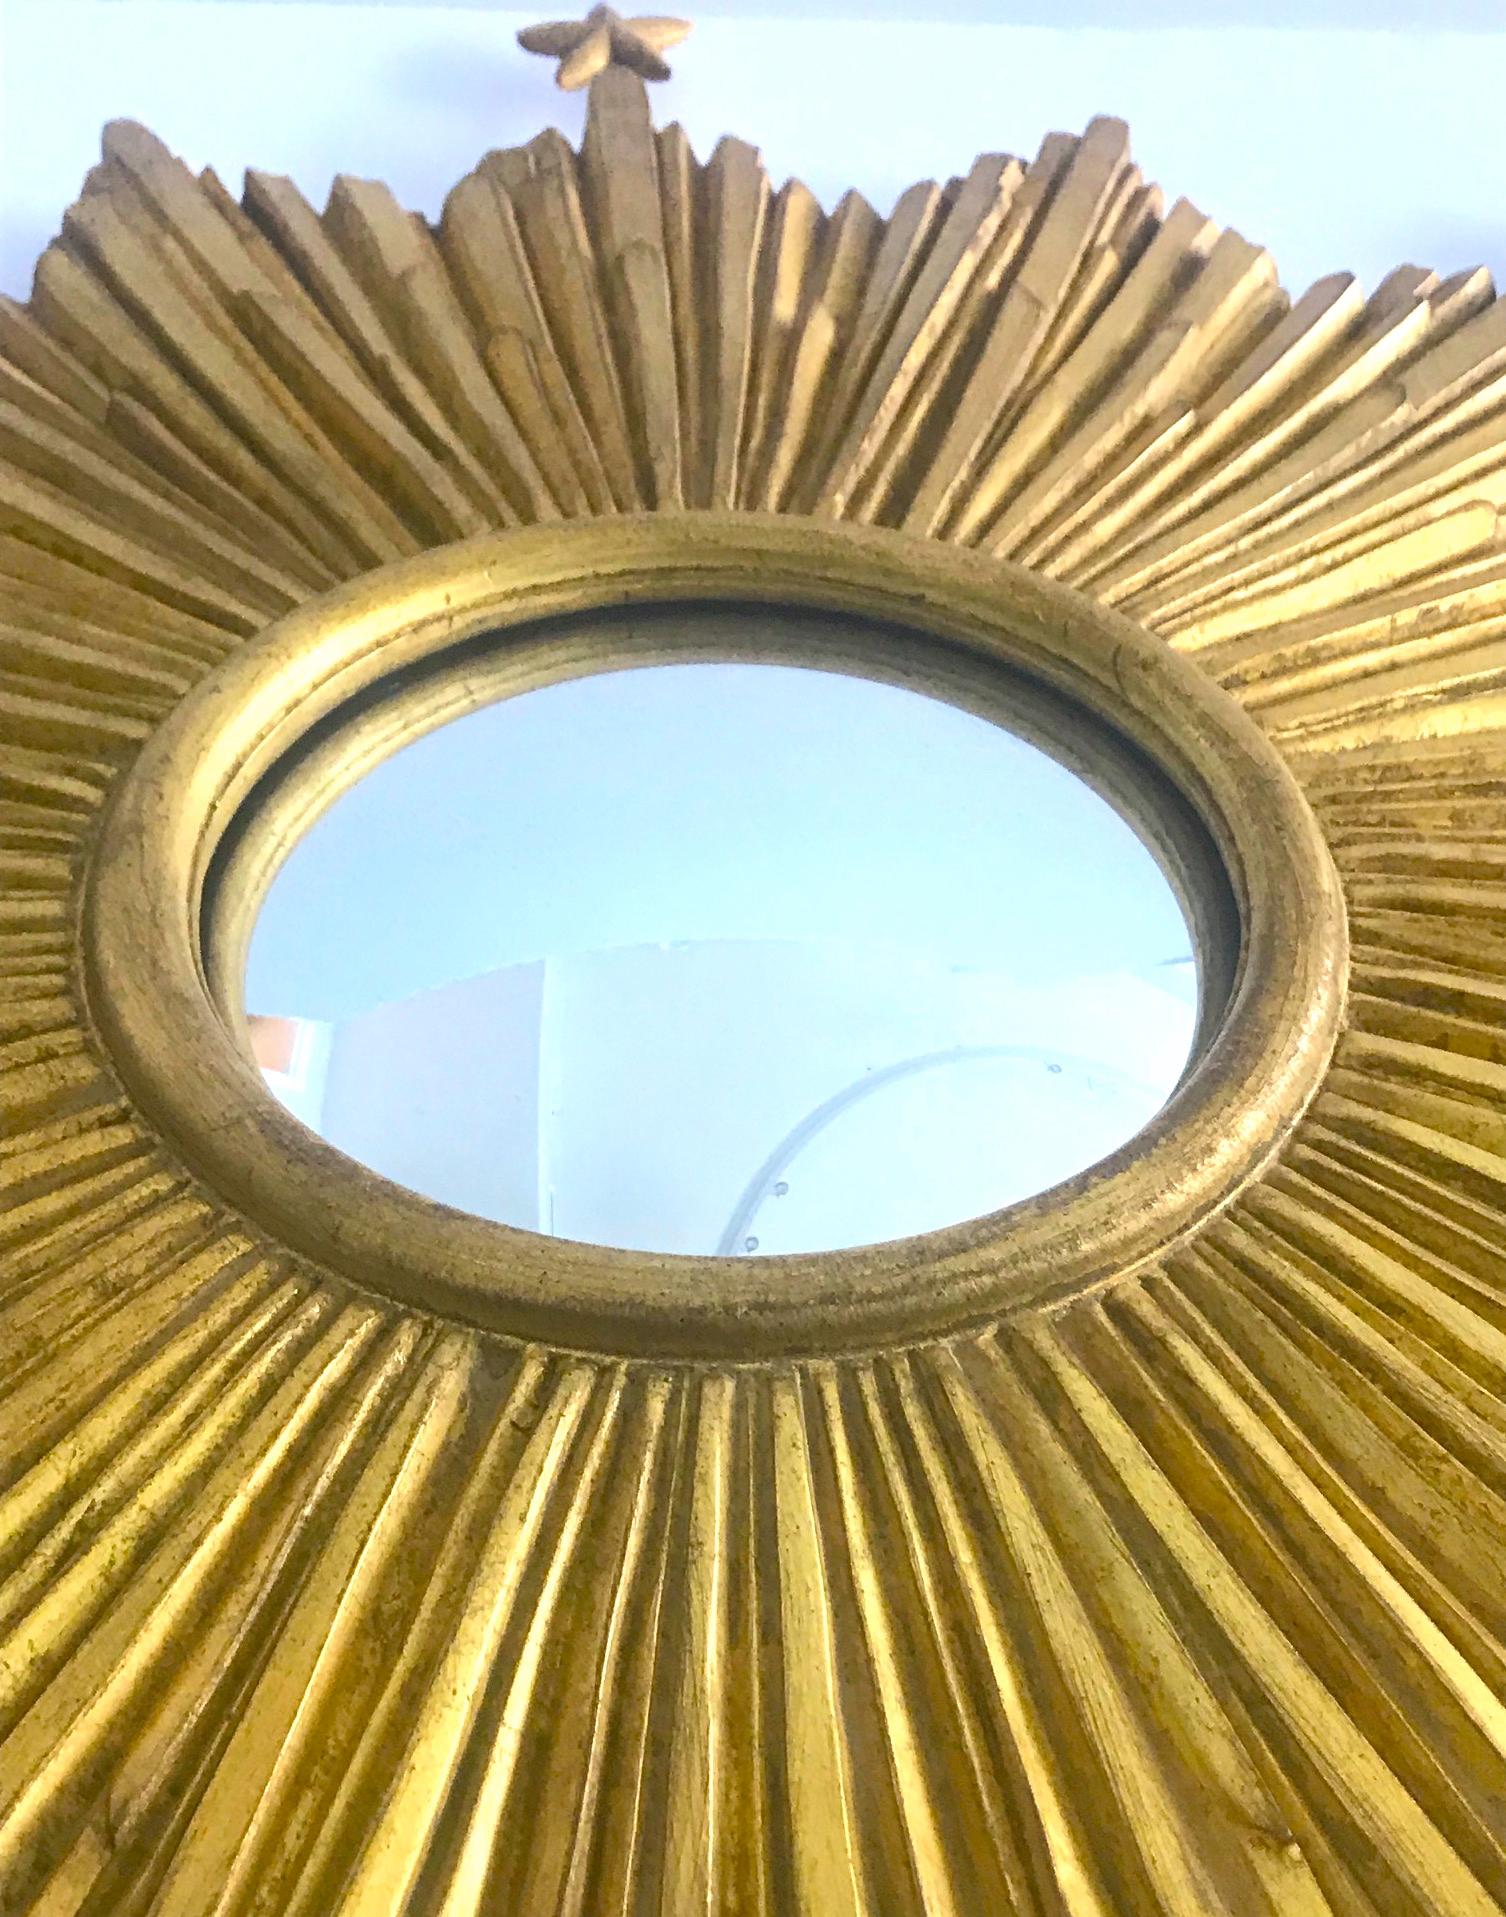 Exceptional Starburst Mirror Hand Carved with Antique Gold Leaf Finish 2